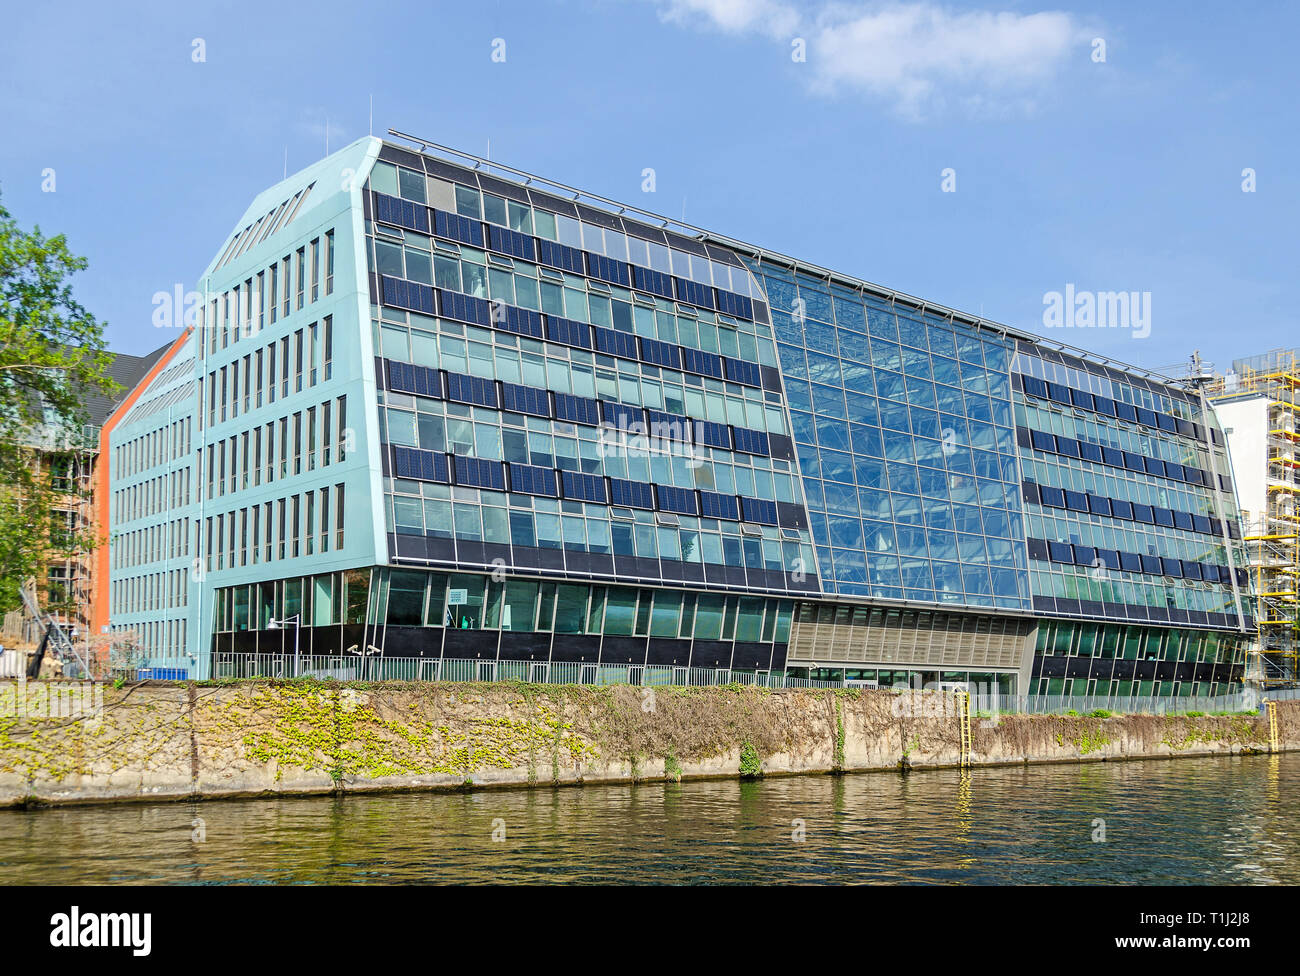 Berlin, Germany - April 22, 2018: Building of the Valentin Software, Germany’s market leader of modern design and simulation software for renewable en Stock Photo